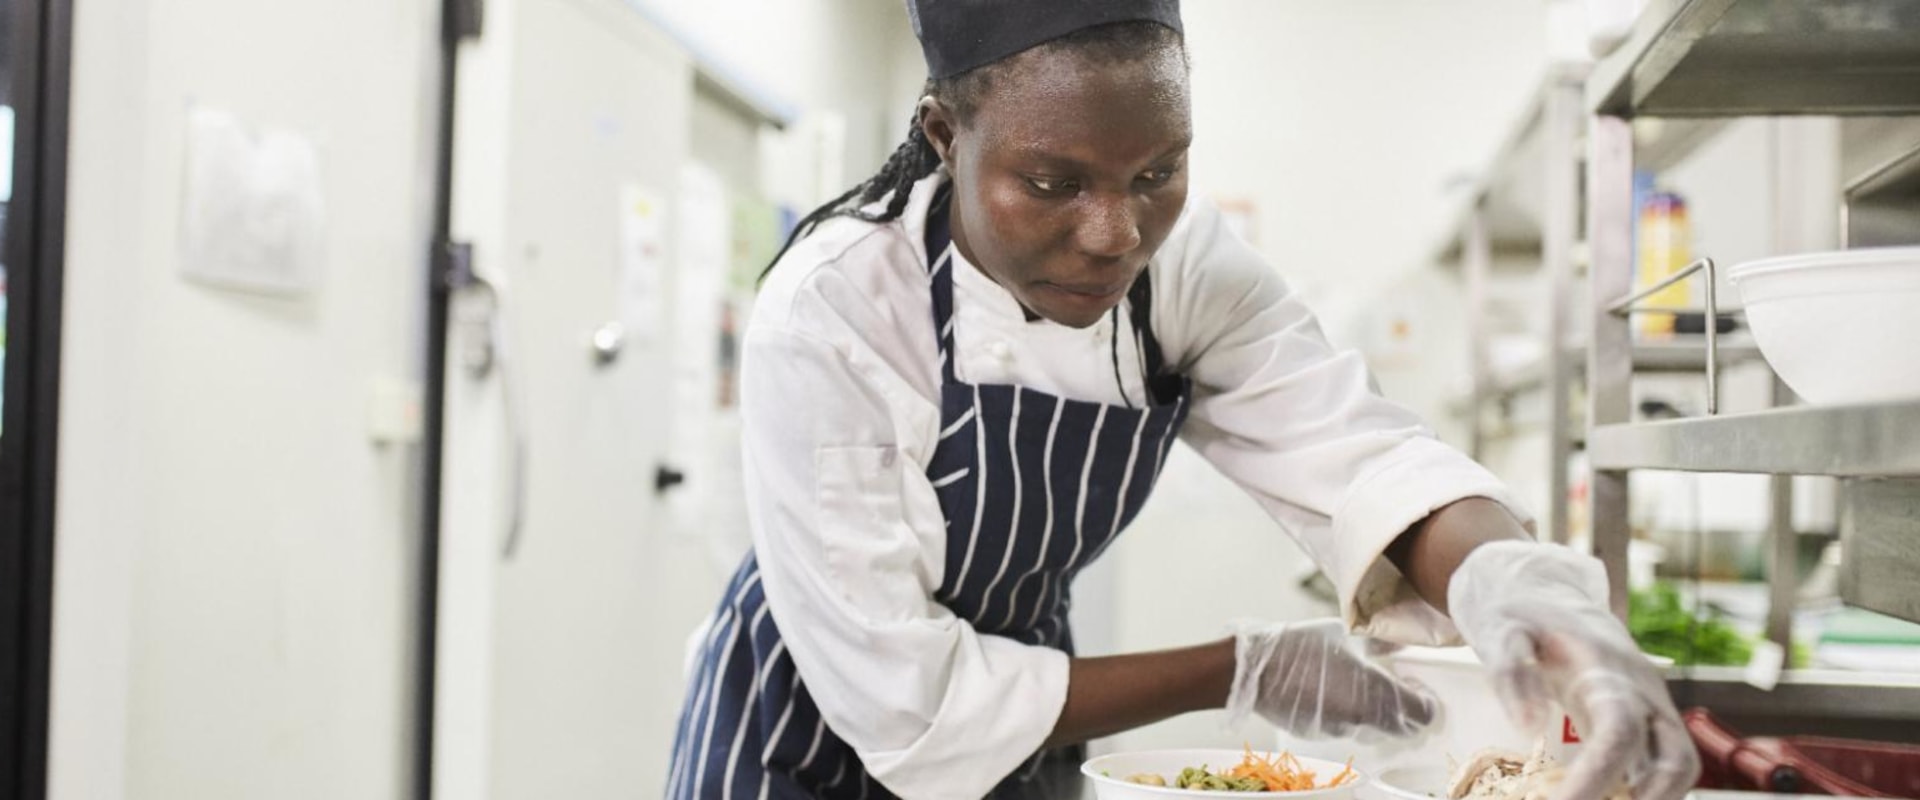 What are the duties of a food service worker?